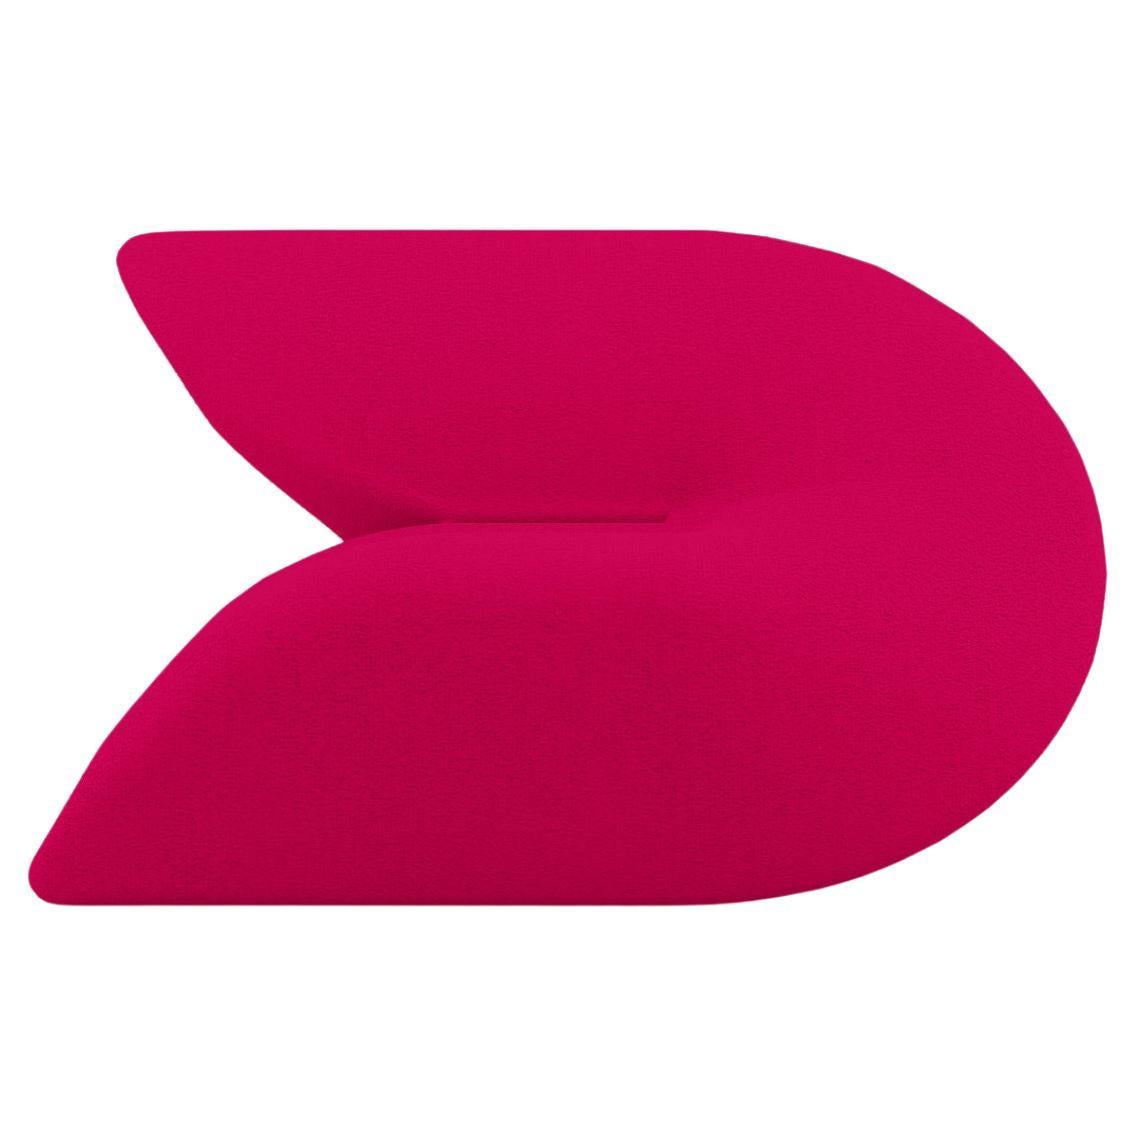 Delta Armchair - Modern Raspberry Red Upholstered Armchair For Sale